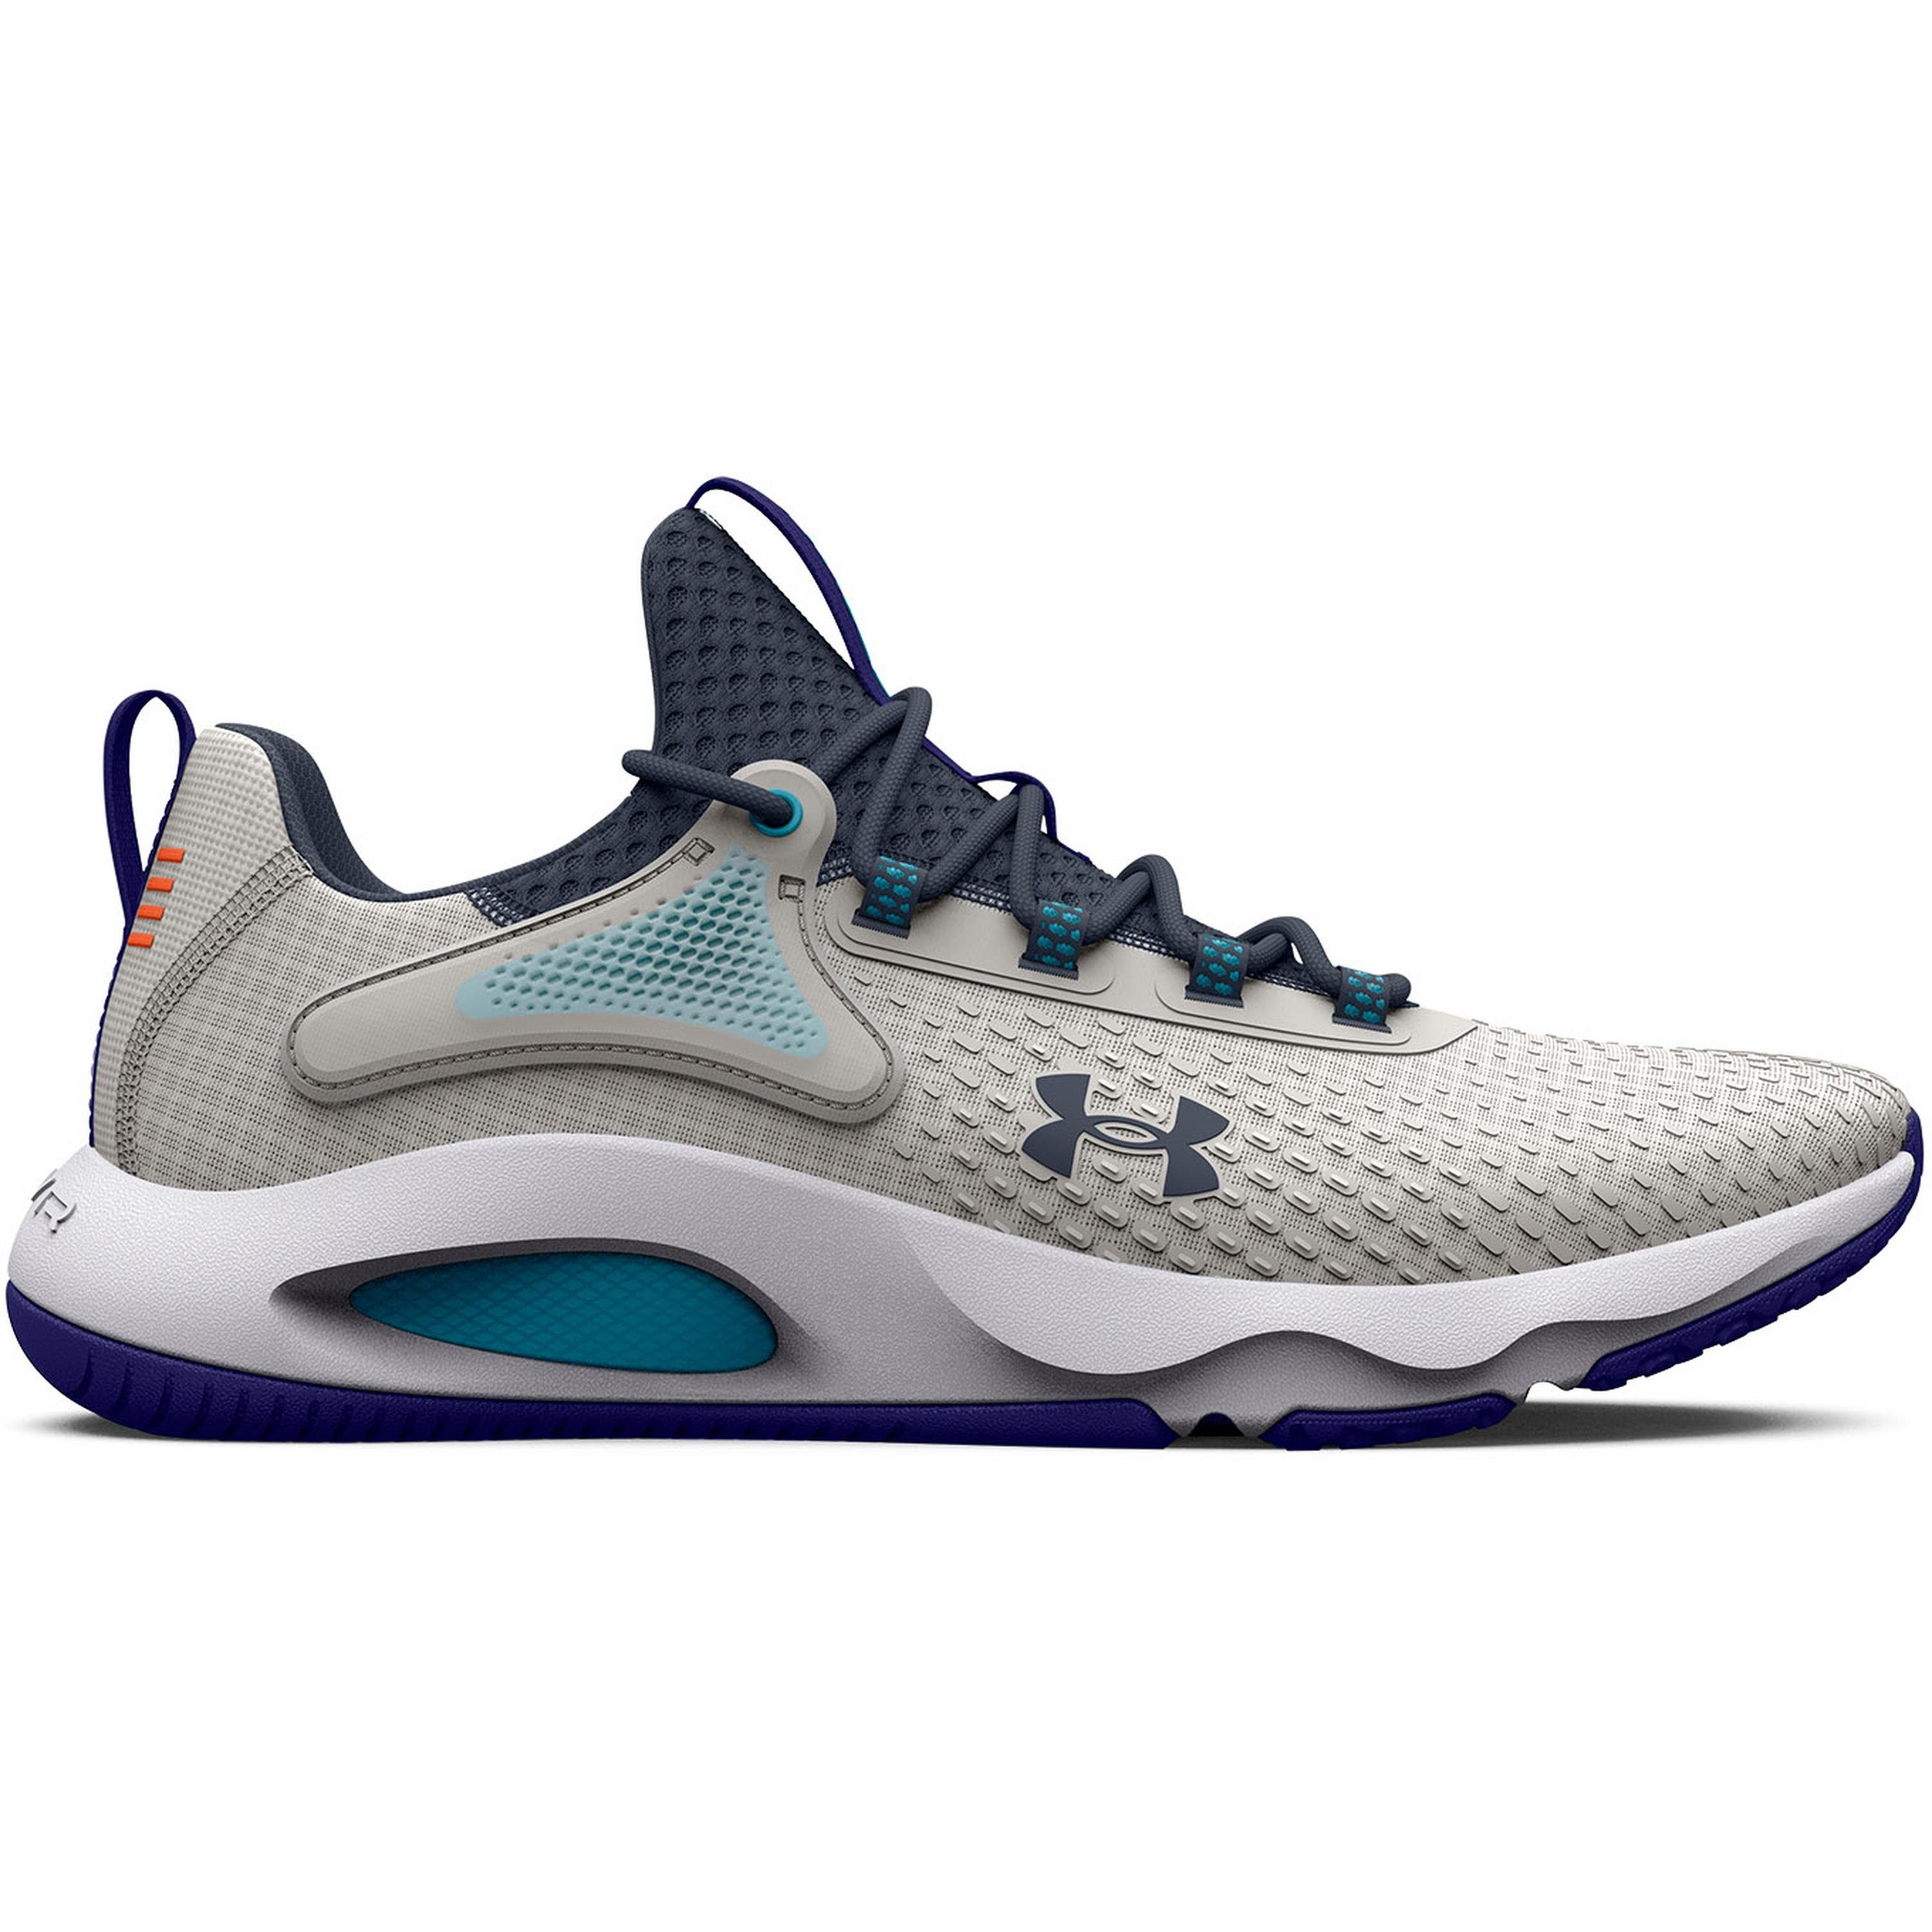 4 Under Armour® Fitnessschuh Grau Rise HOVR